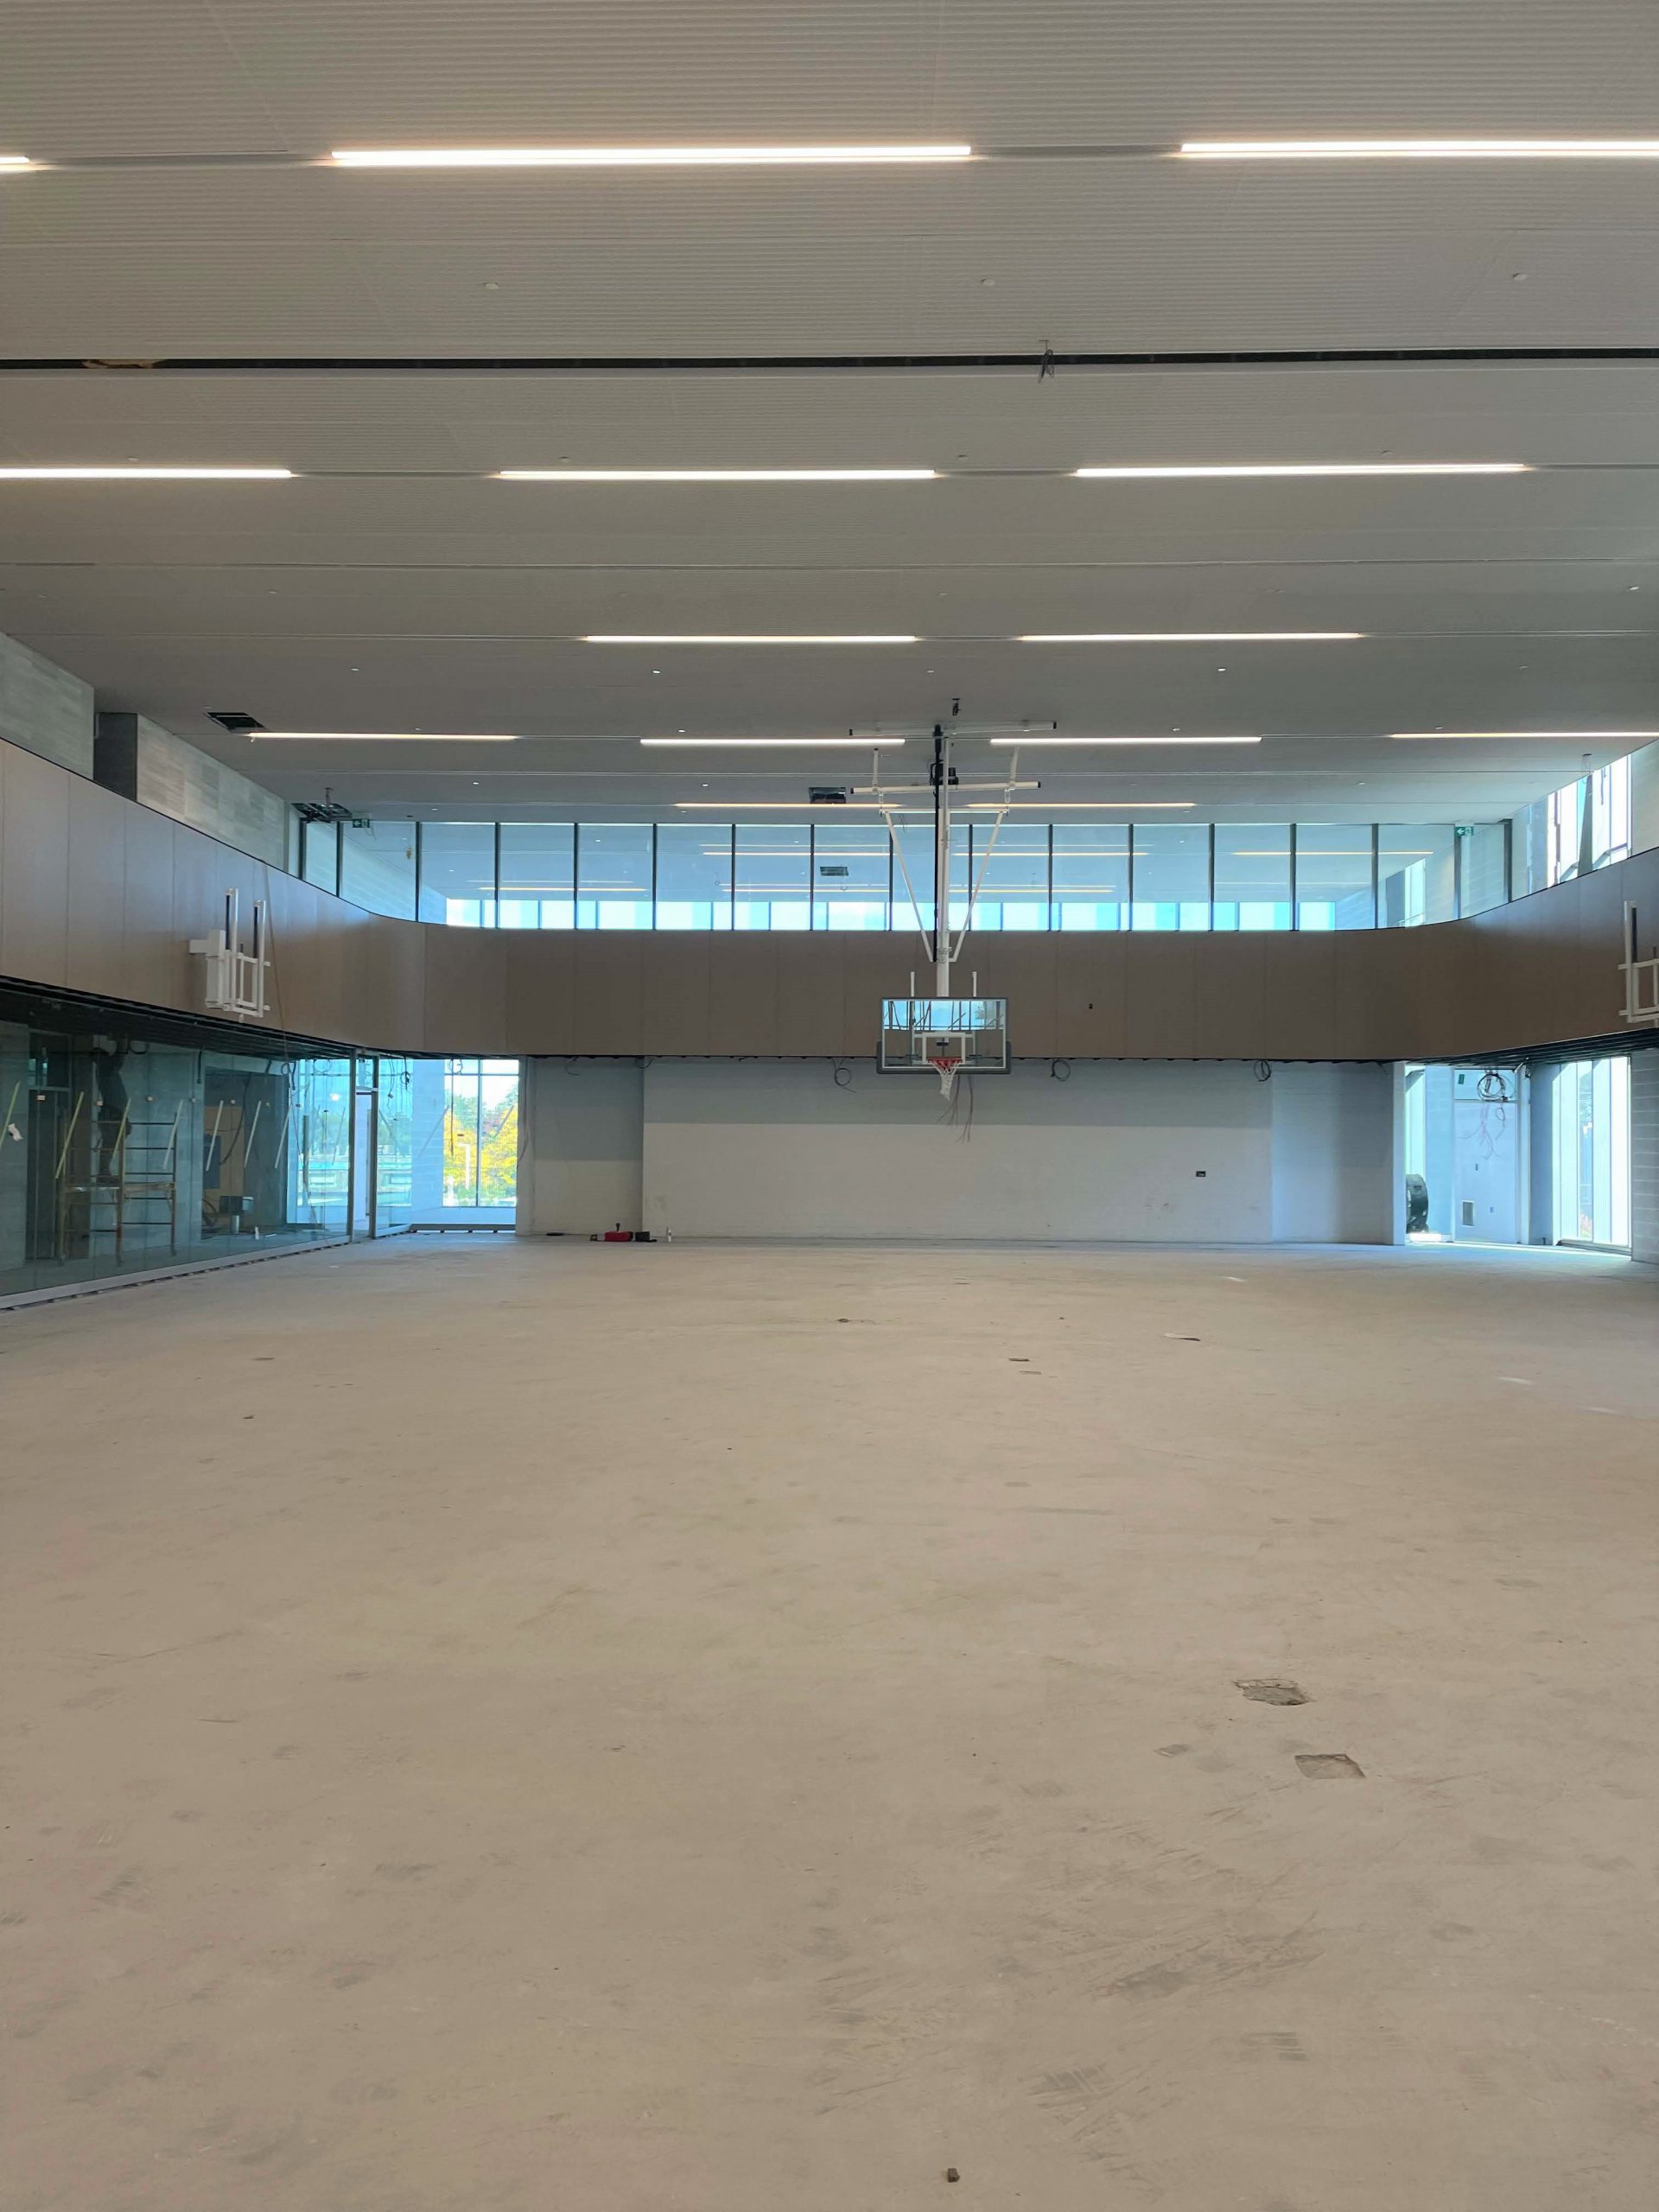 A photograph of the main entrance lobby during construction which shows a bright four storey space that includes a main feature staircase, main entrance to the library and reception desk for the aquatic facility. The linear wood ceiling is shown as being mostly installed, and addresses the acoustics for the space to minimize sound reverberation.